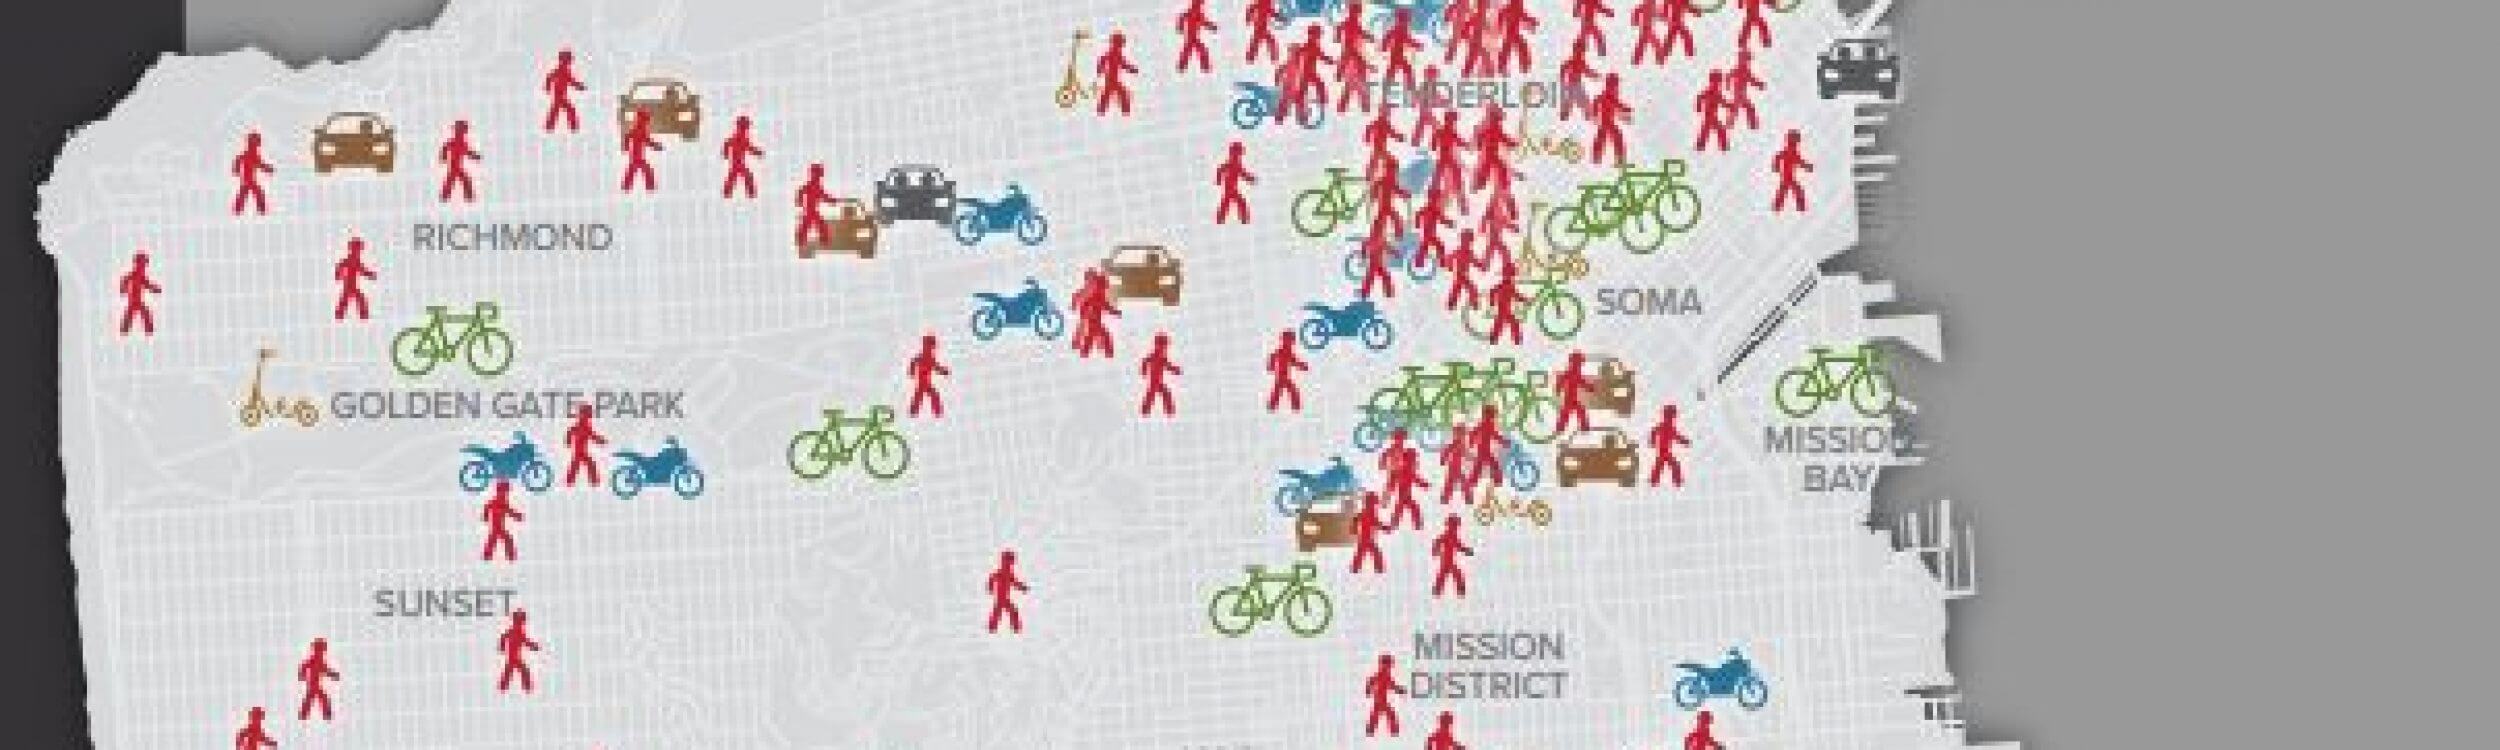 The City’s new Vision Zero strategy: a meaningful step toward safer streets